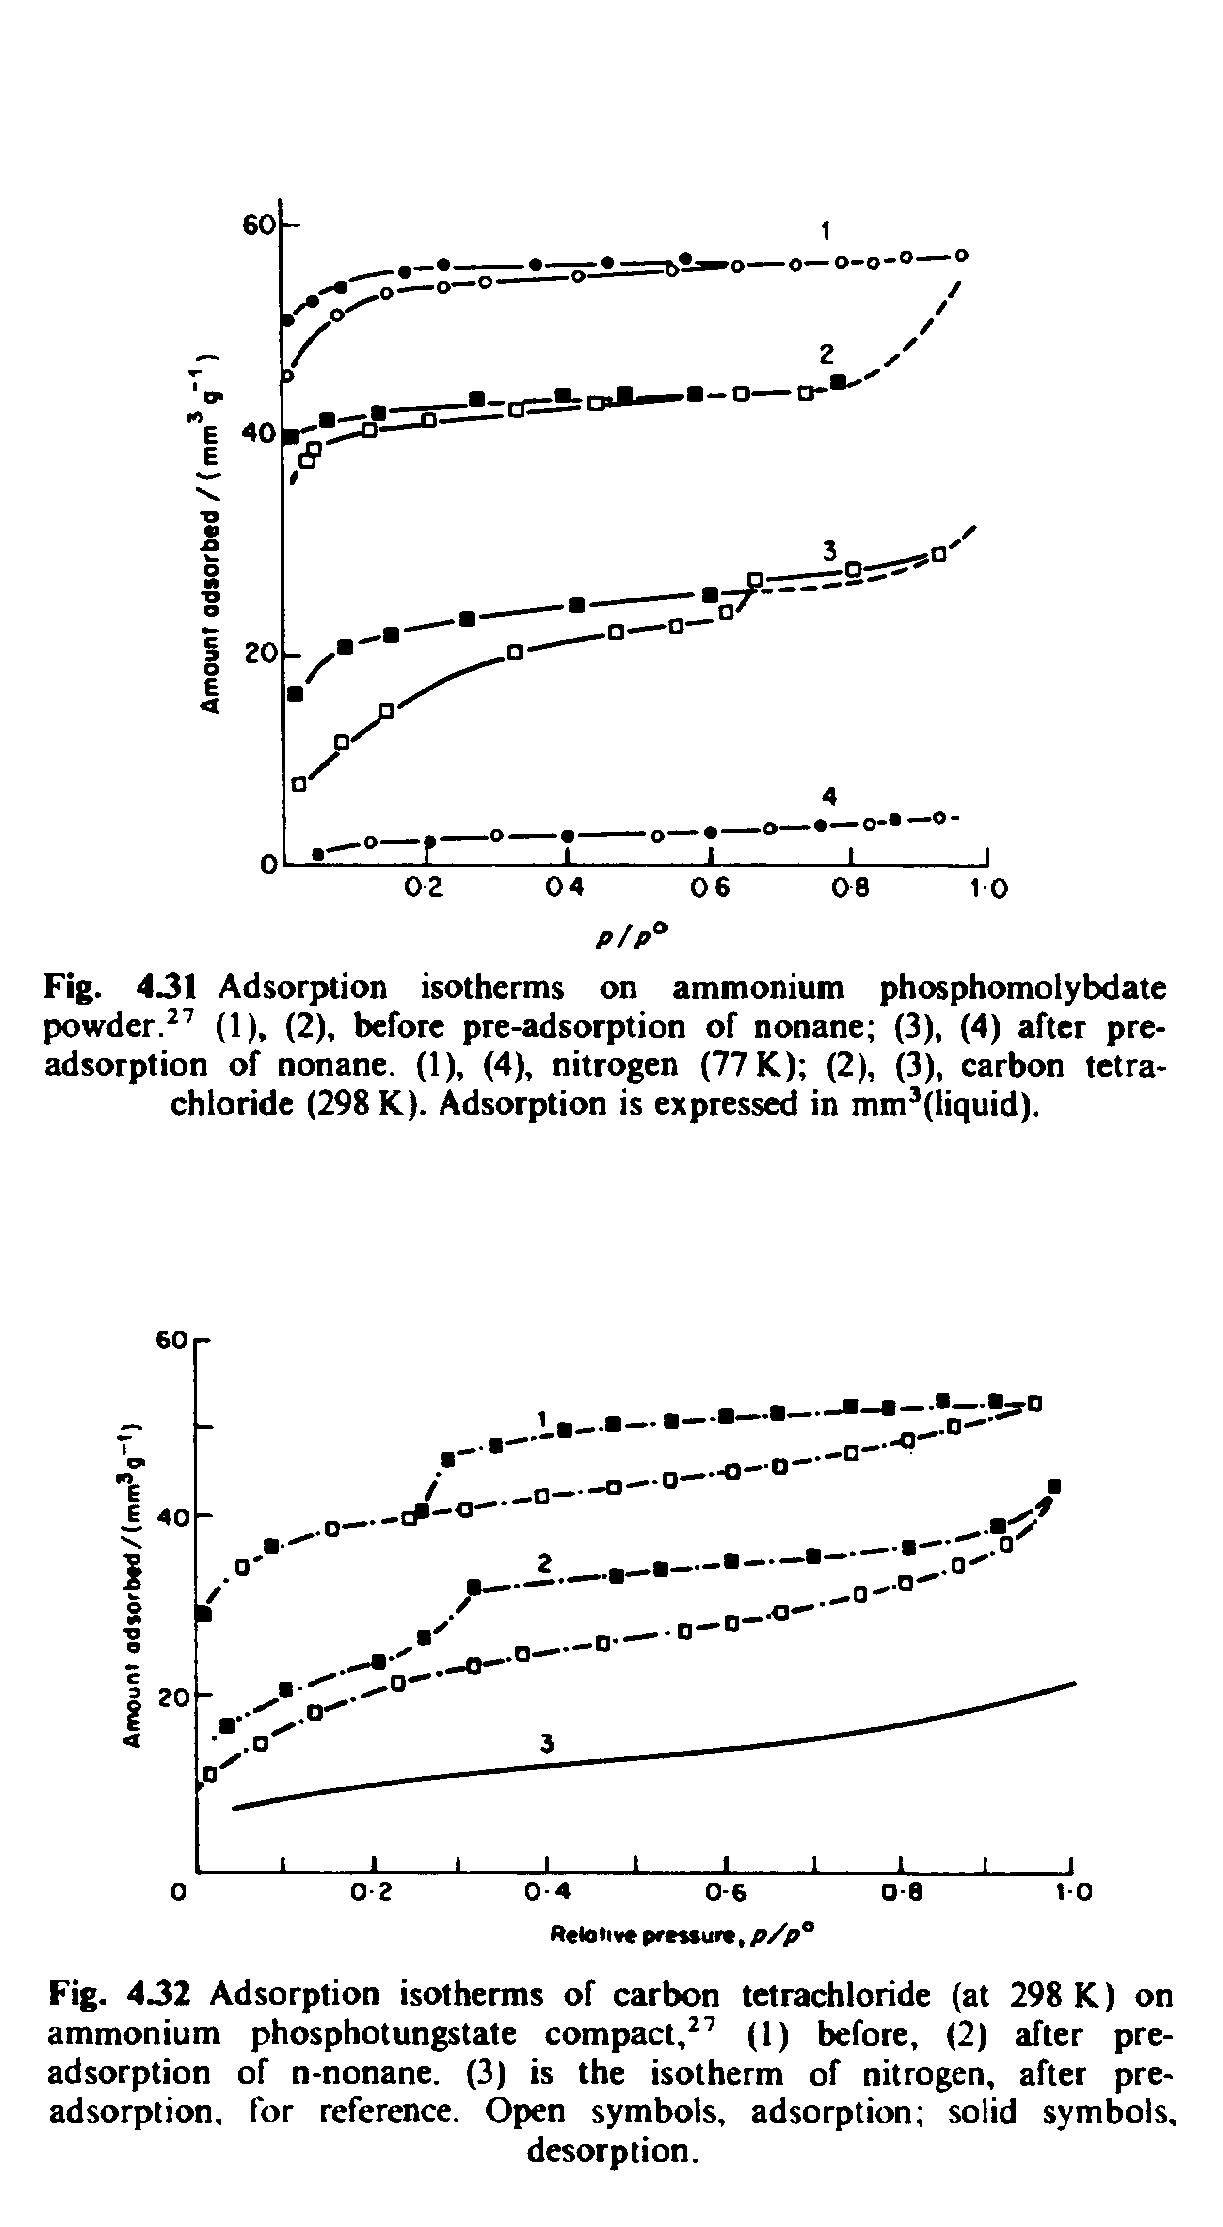 Fig. 4J1 Adsorption isotherms on ammonium phosphomolybdate powder. (1), (2), before pre-adsorption of nonane (3), (4) after preadsorption of nonane. (1), (4), nitrogen (77 K) (2), (3), carbon tetrachloride (298 K). Adsorption is expressed in mm (liquid).